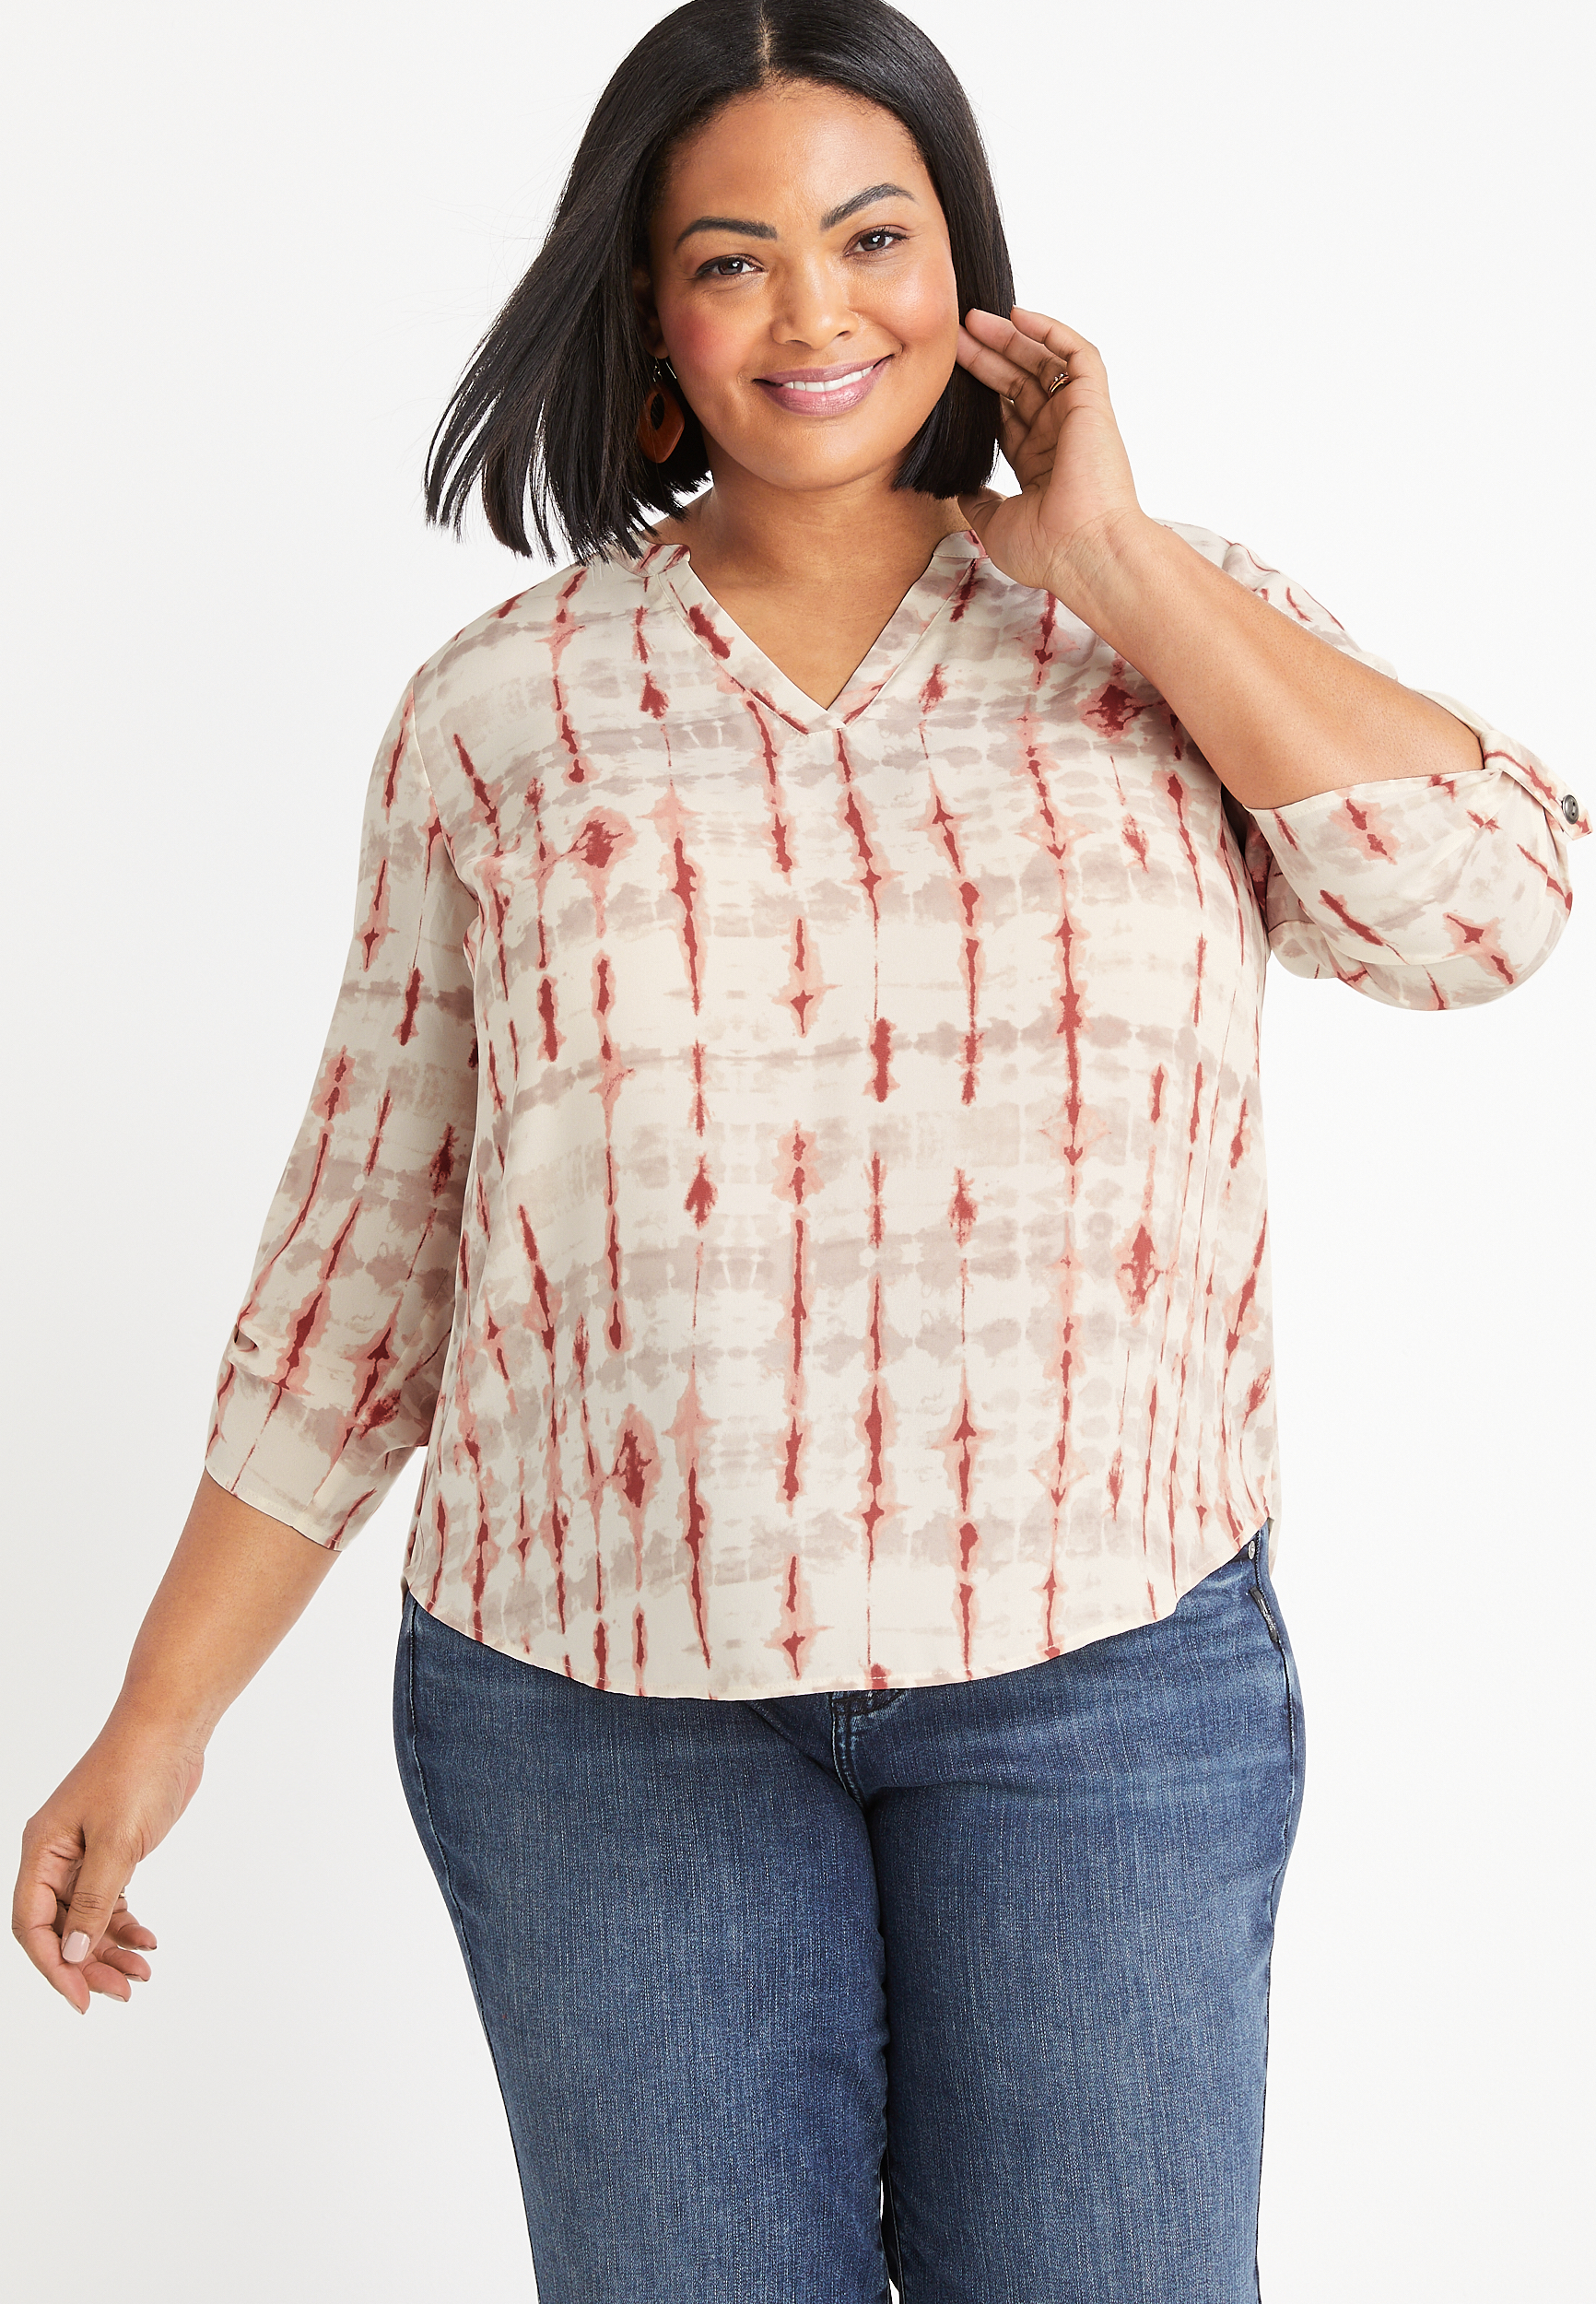 Plus Size Atwood White Tie Dye 3/4 Sleeve Popover Blouse | maurices